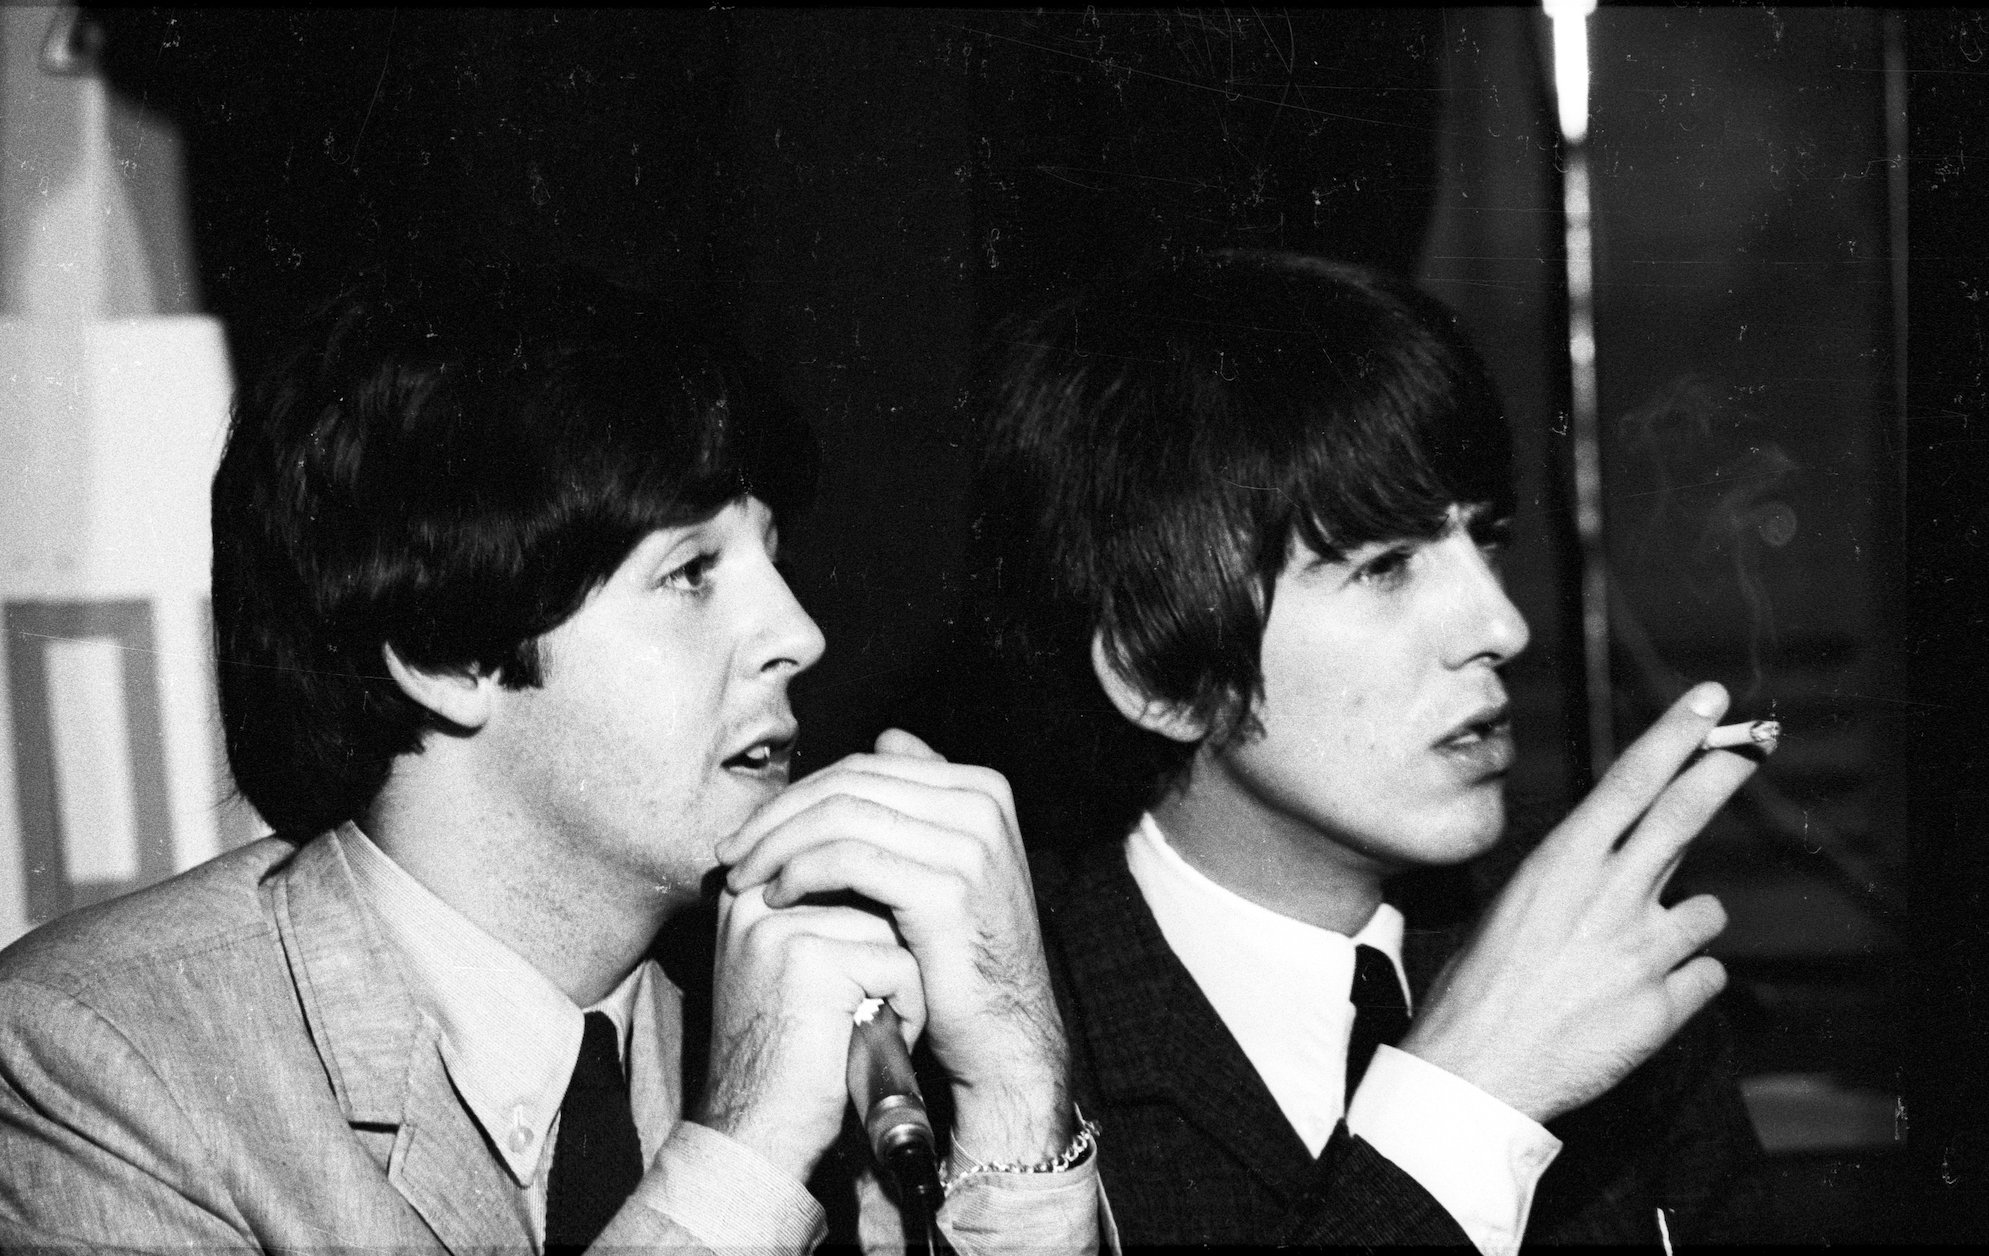 Paul McCartney and George Harrison at a press conference for The Beatles in 1964